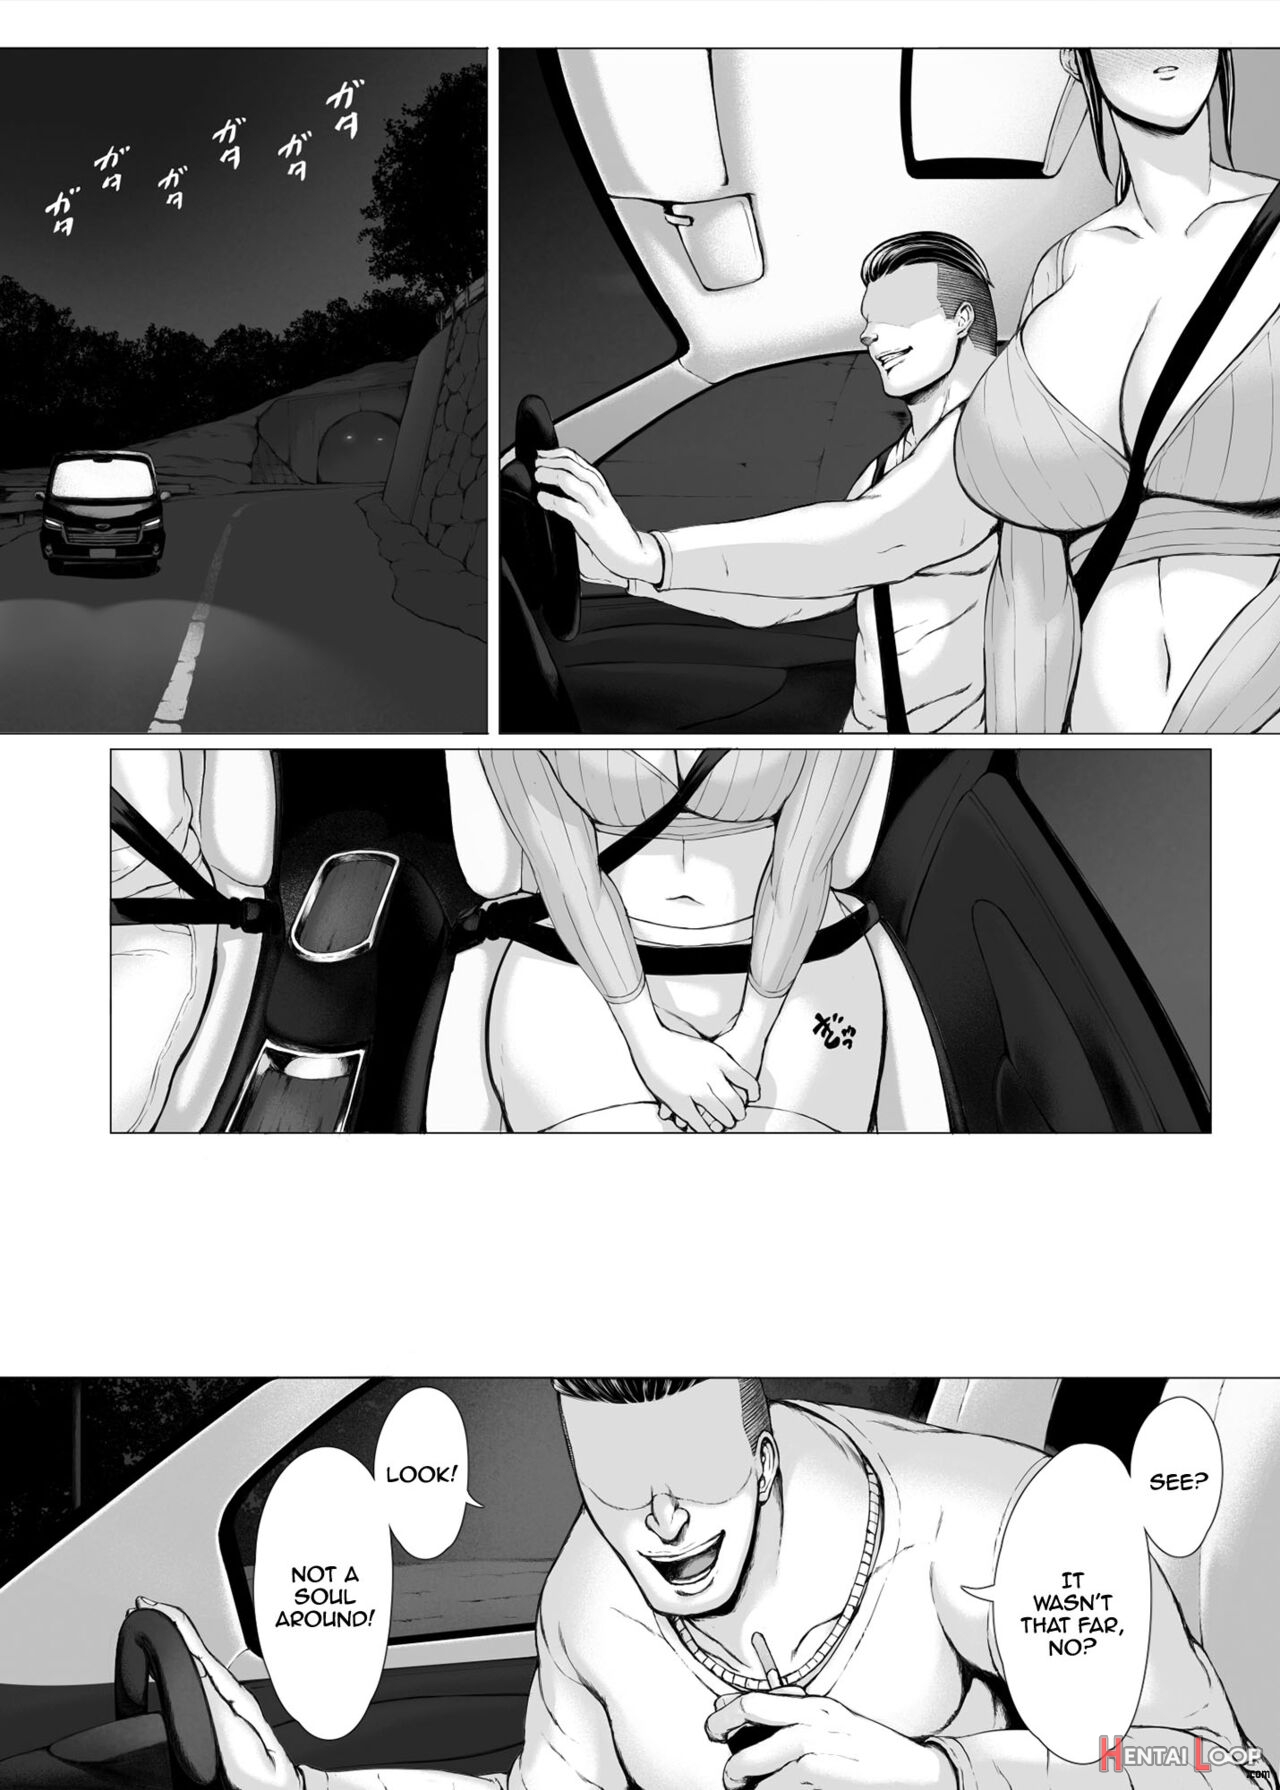 The Mother Fucker 3 - Trip With A Playboy Arc page 2